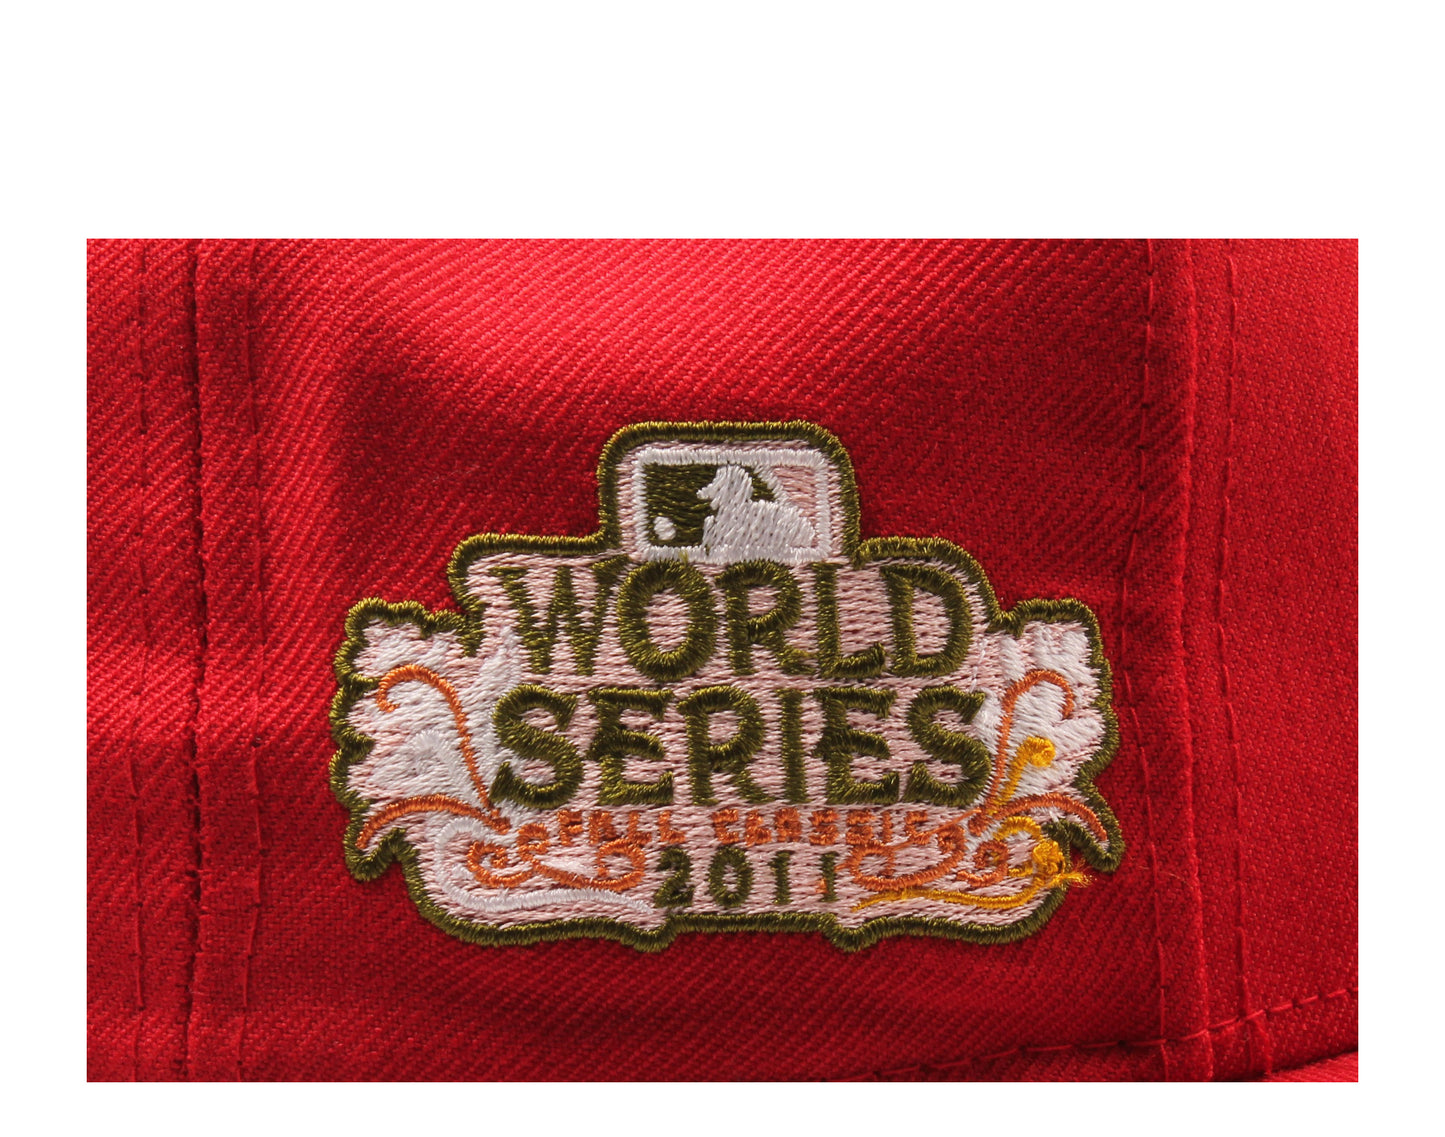 New Era x NYCMode 59Fifty MLB St. Louis Cardinals 2011 World Series Fitted W/ Pink Undervisor